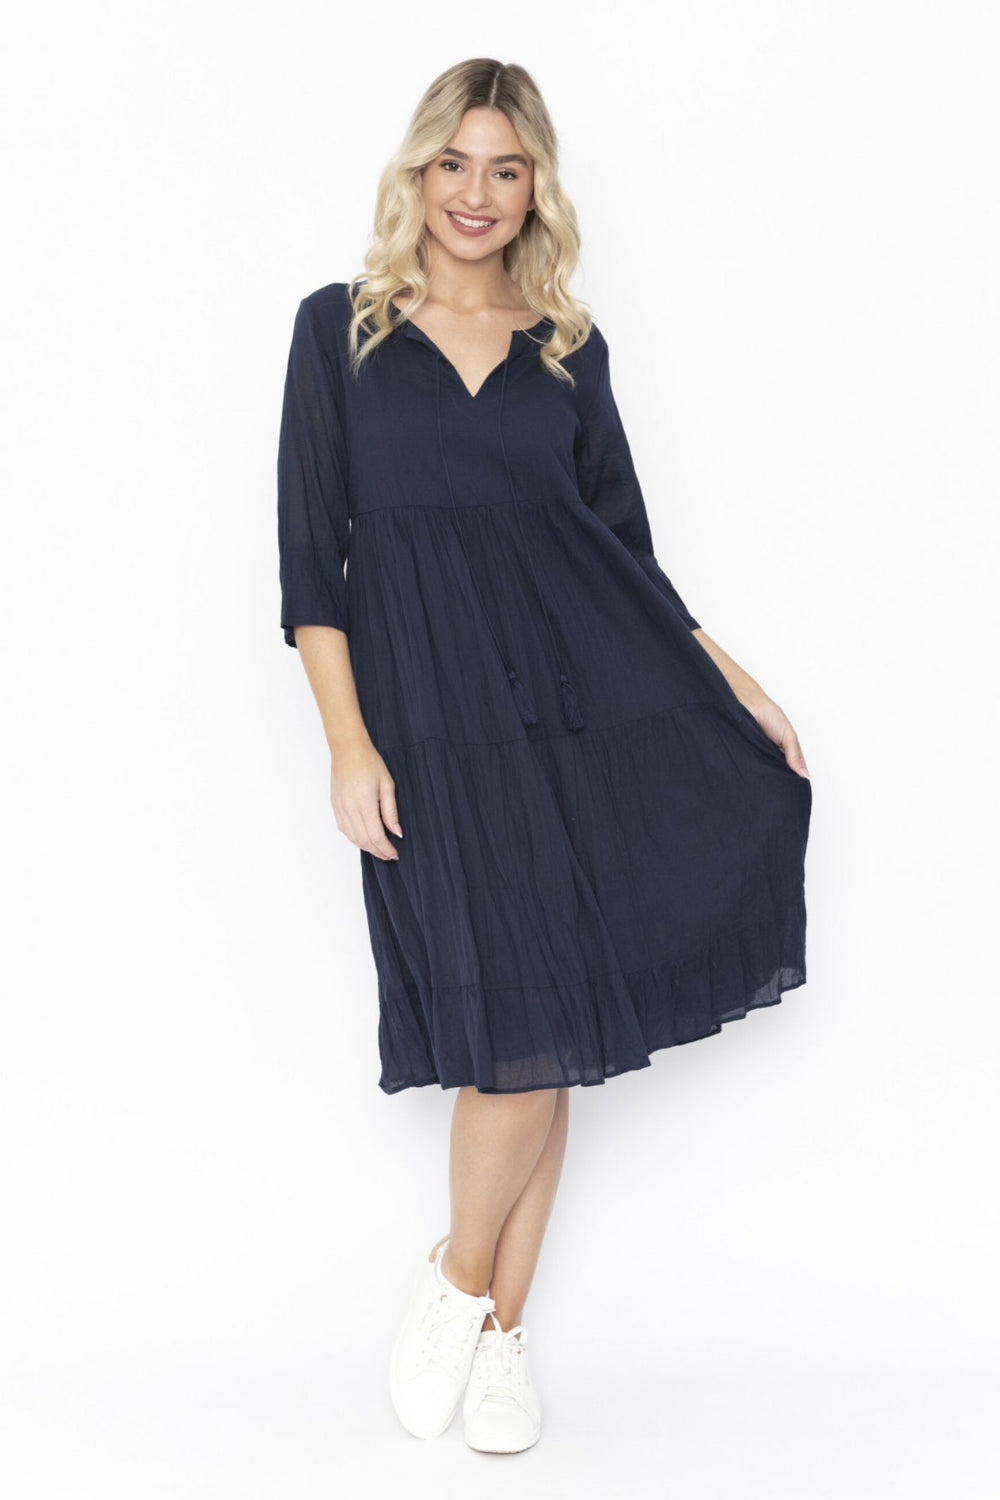 One Summer DW58D Navy Amber 3/4 Sleeve Smock Dress - Experience Boutique